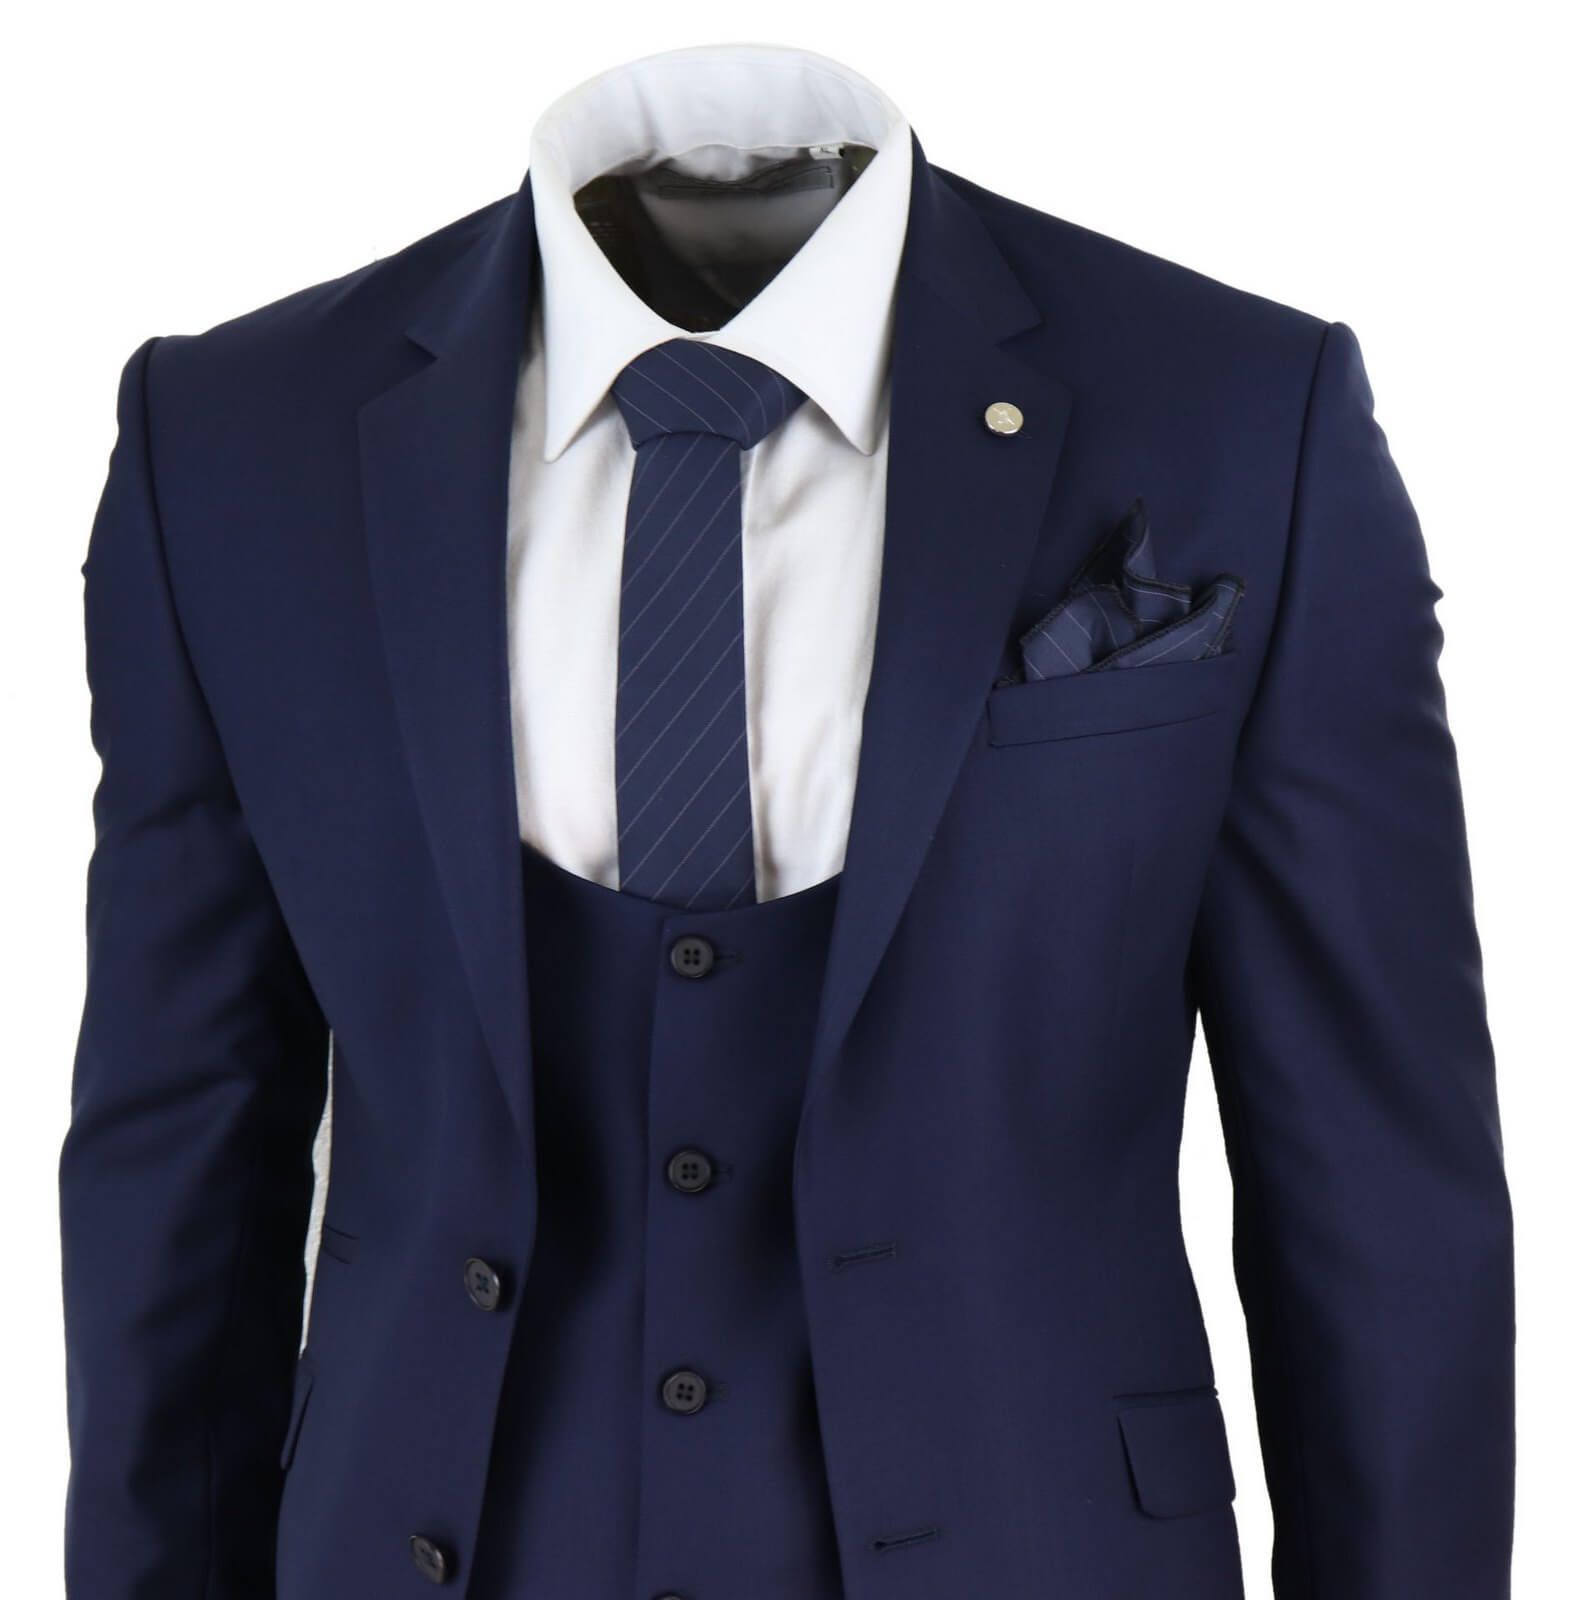 a navy suit for war